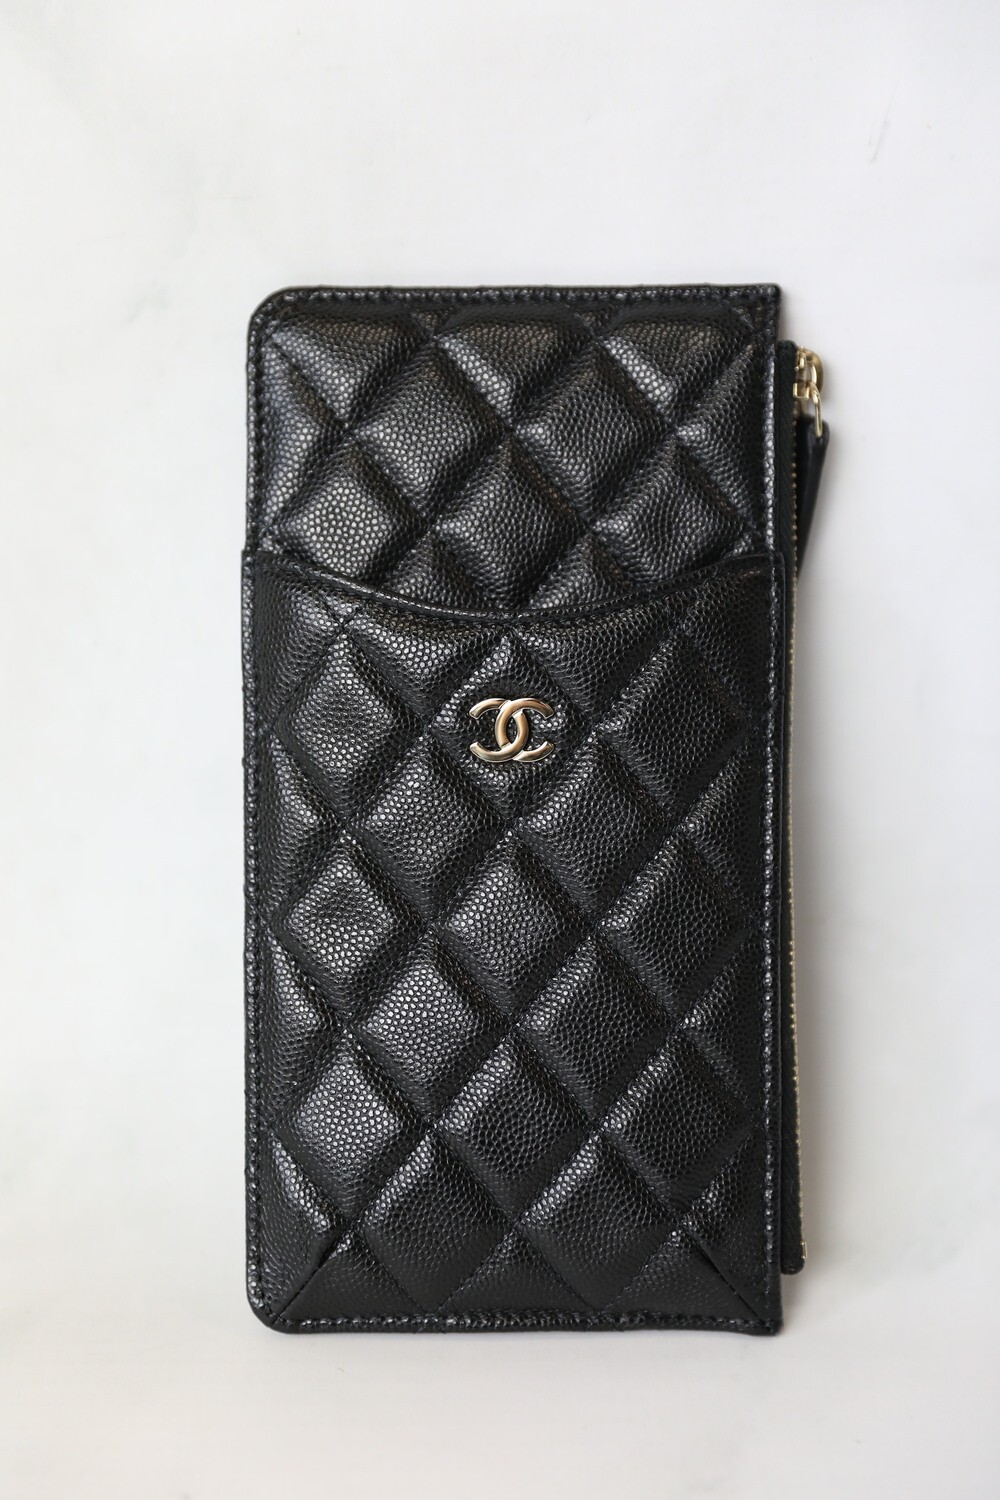 Chanel Phone Pouch Holder Wallet, Black Caviar with Gold Hardware, Preowned  in Box WA001